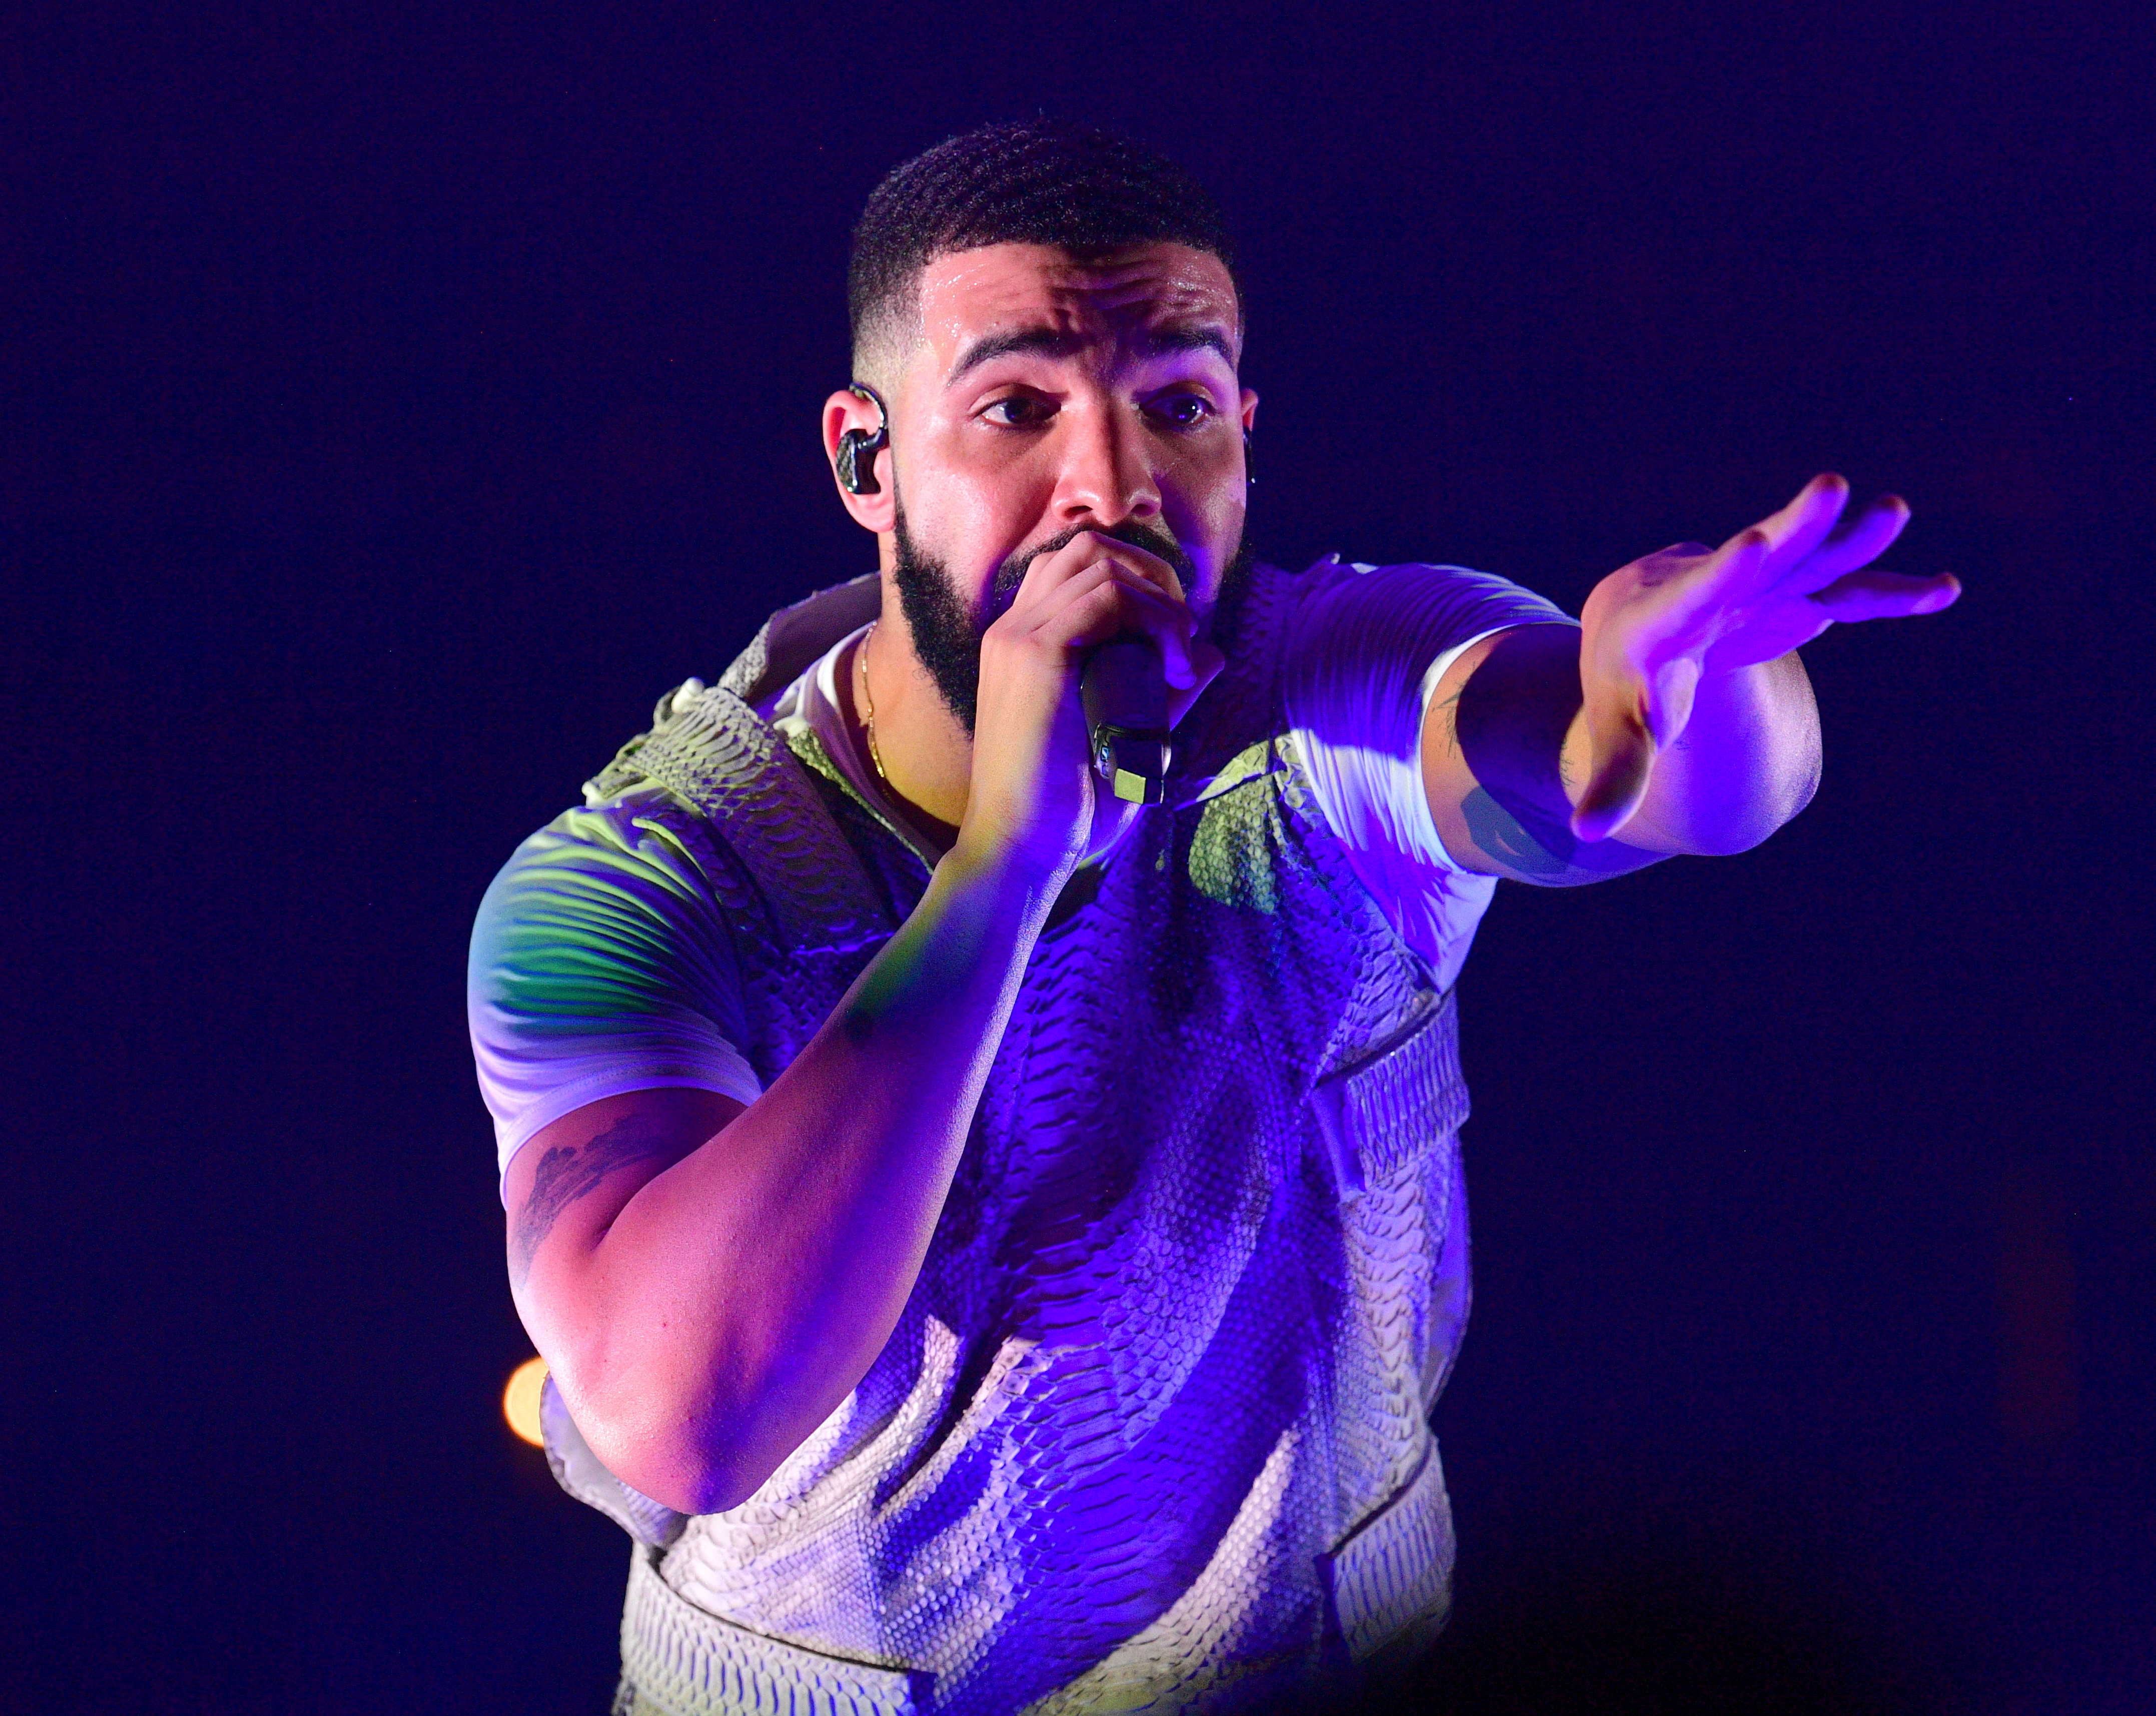 More A.I. Drake Songs Surface Amid UMG’s Attempted Takedown